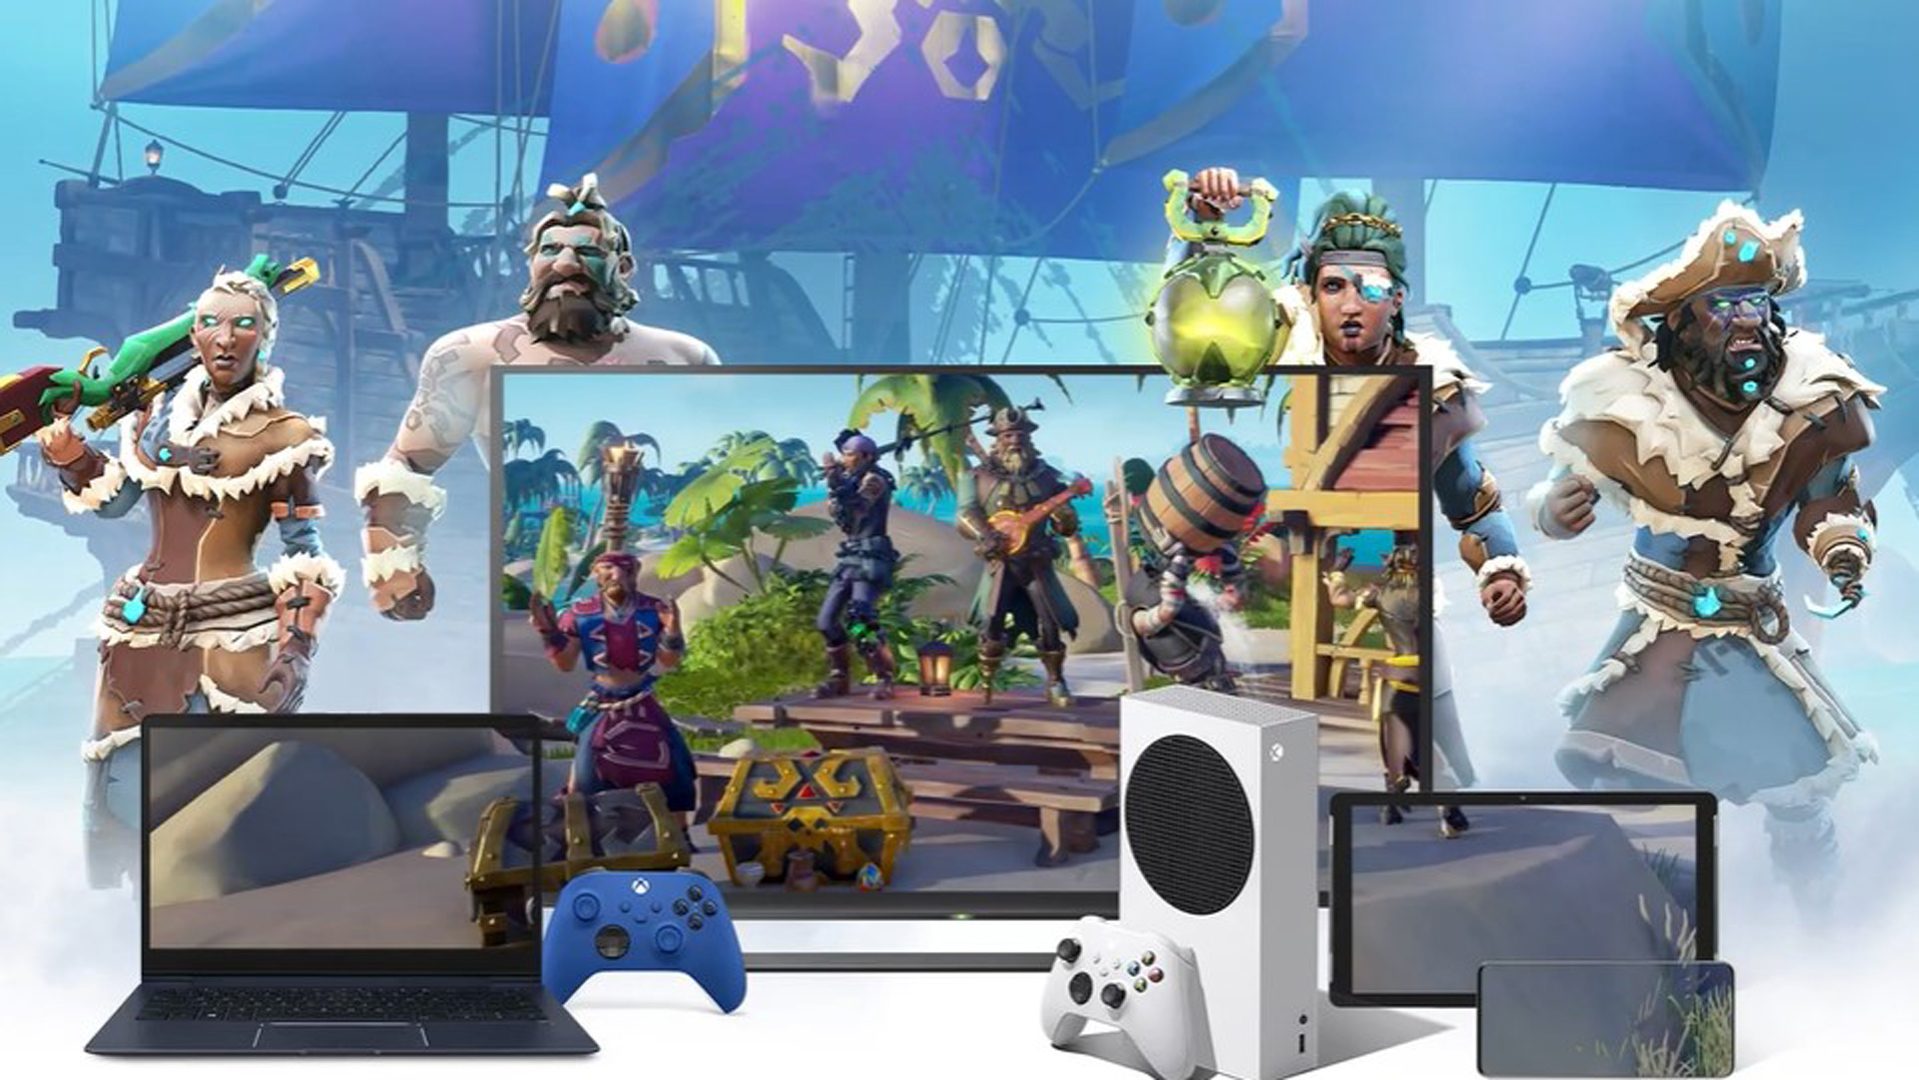 Xbox TV app enables cloud gaming on smart TVs starting this June